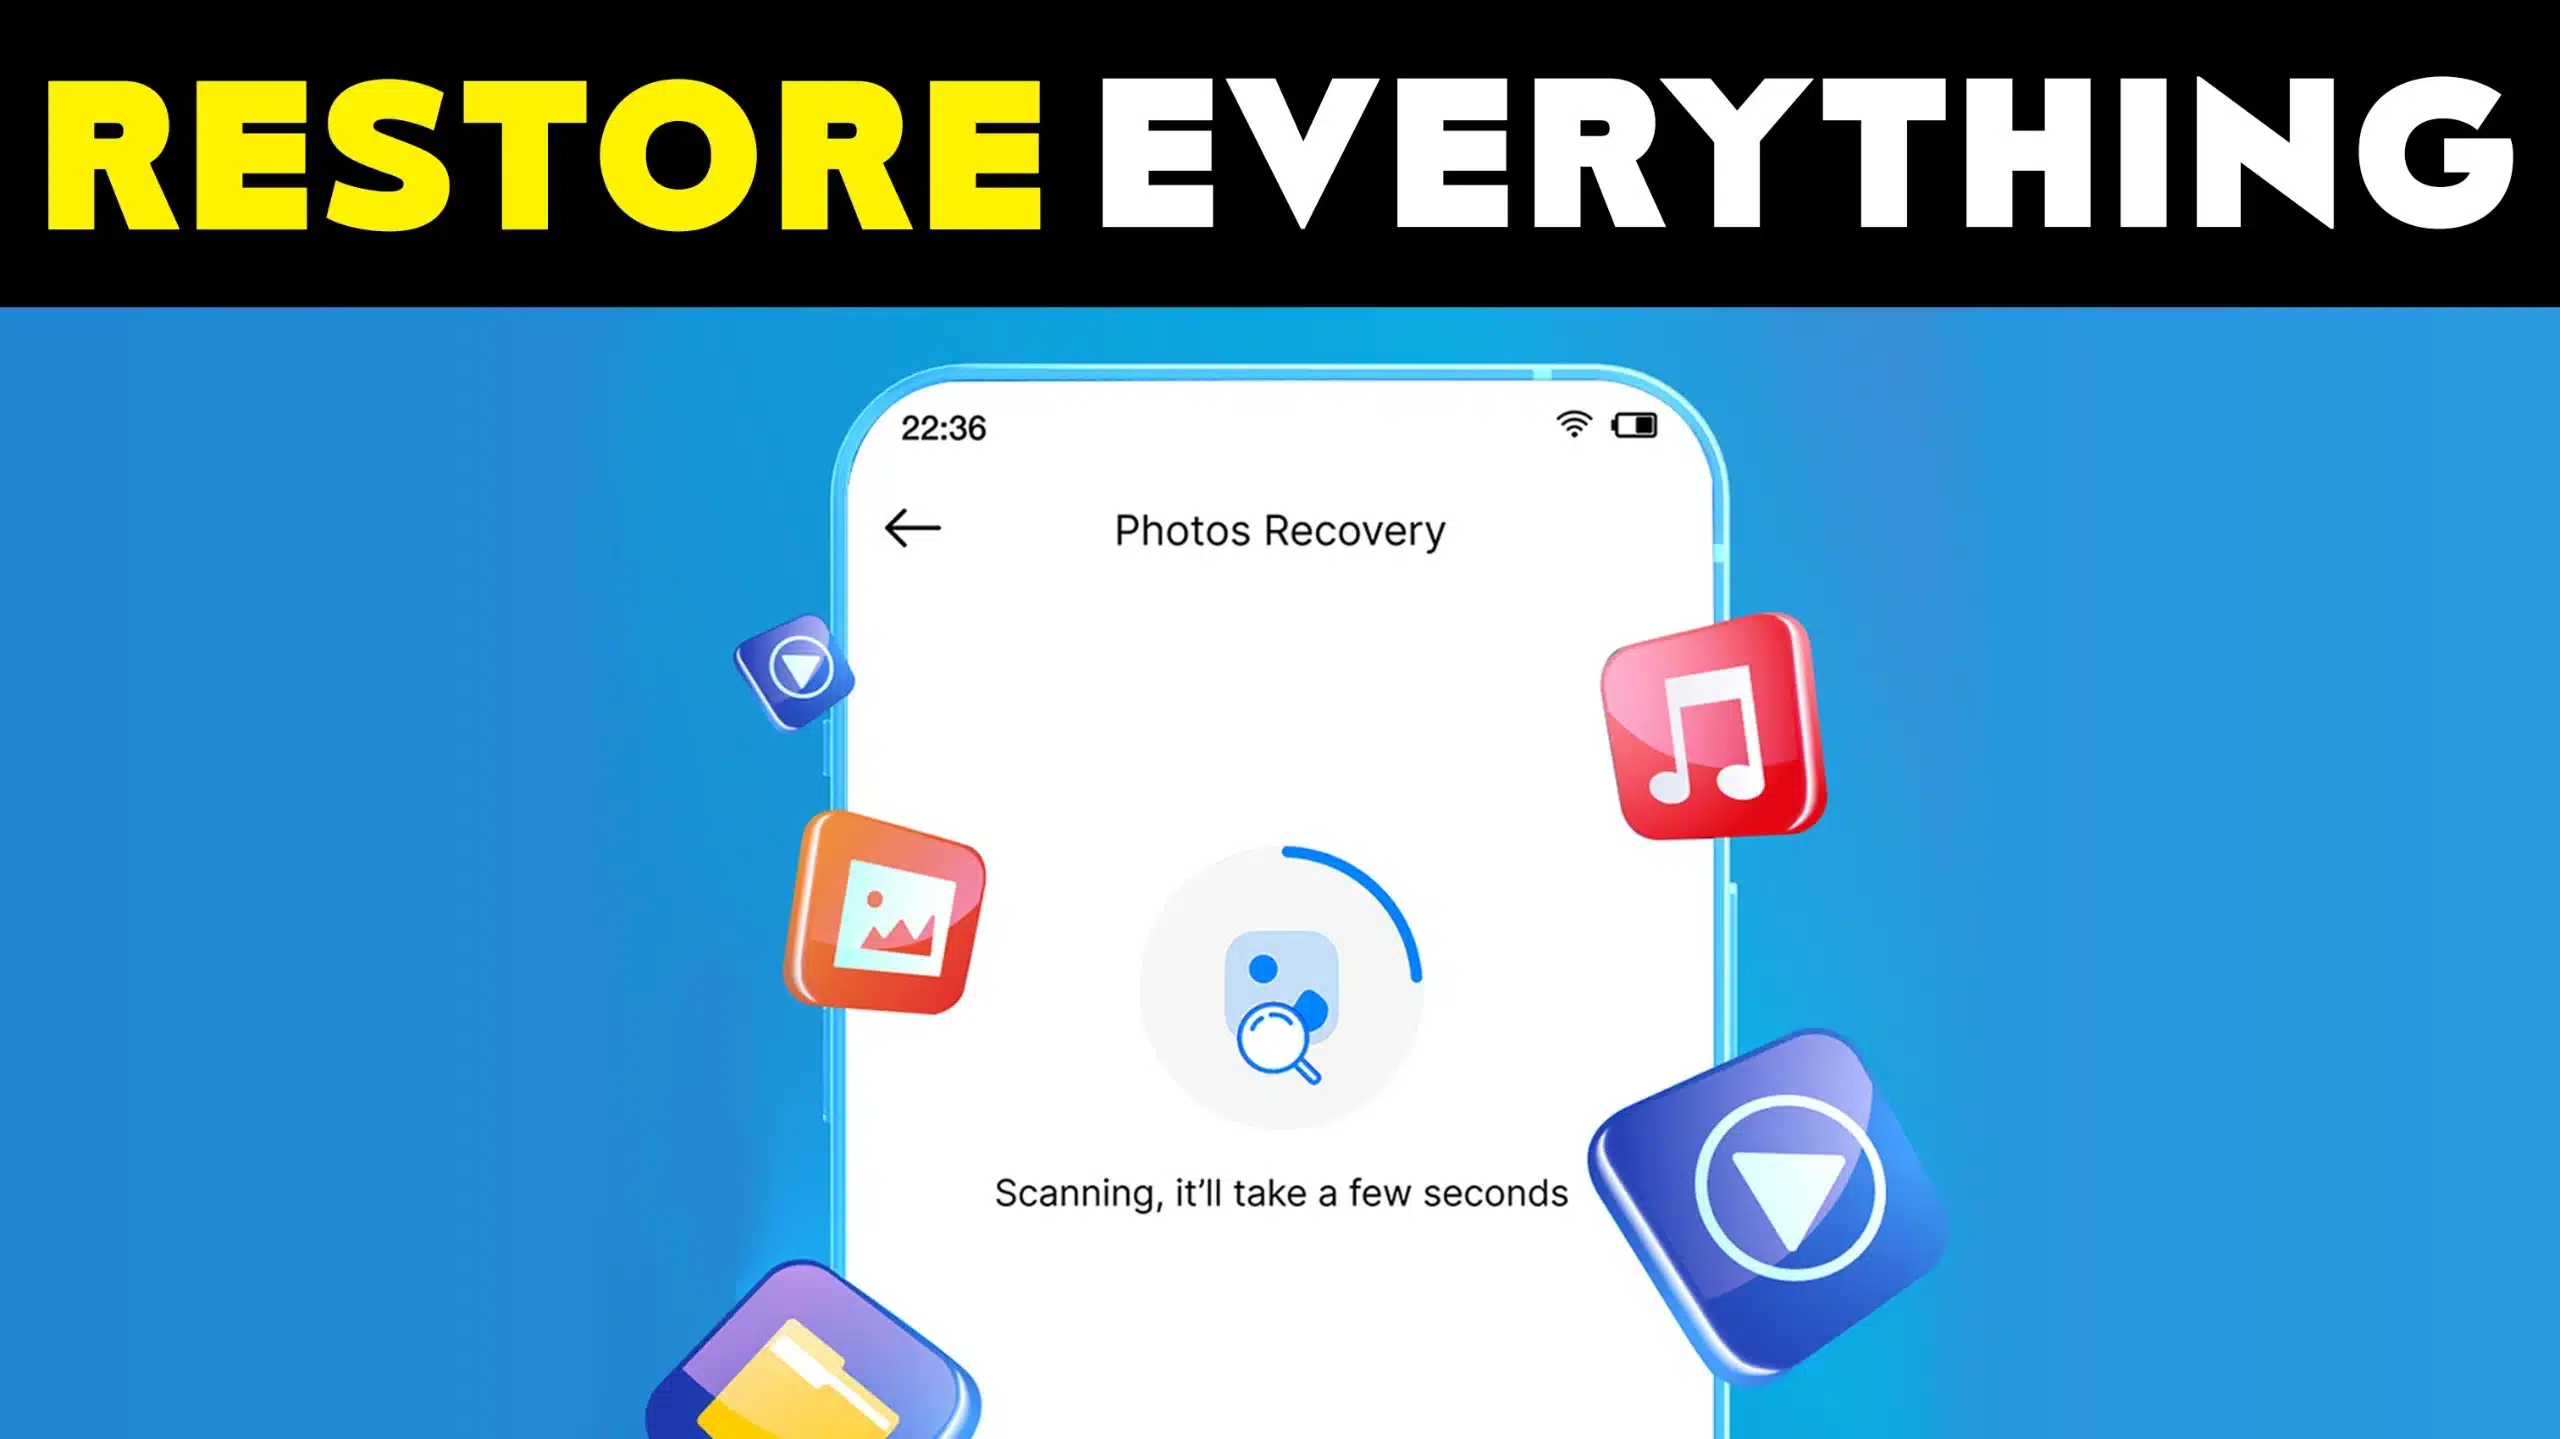 Restore Everything Lost Data Easily Discover the Best Android App for File Recovery!